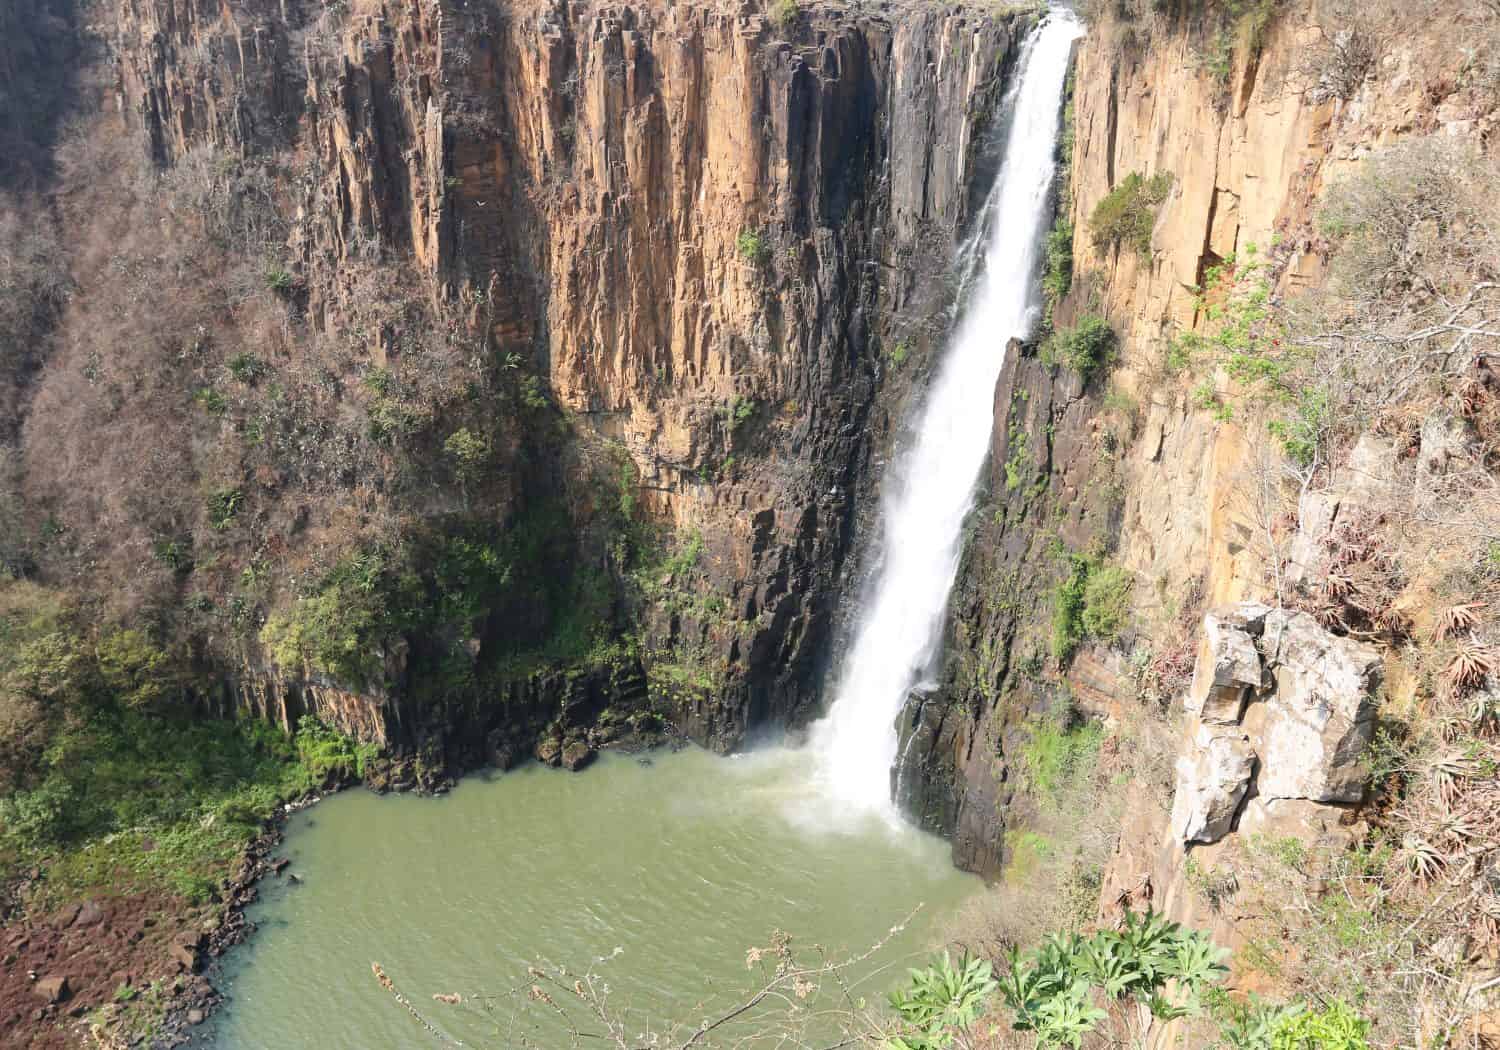 Howick Falls in South Africa